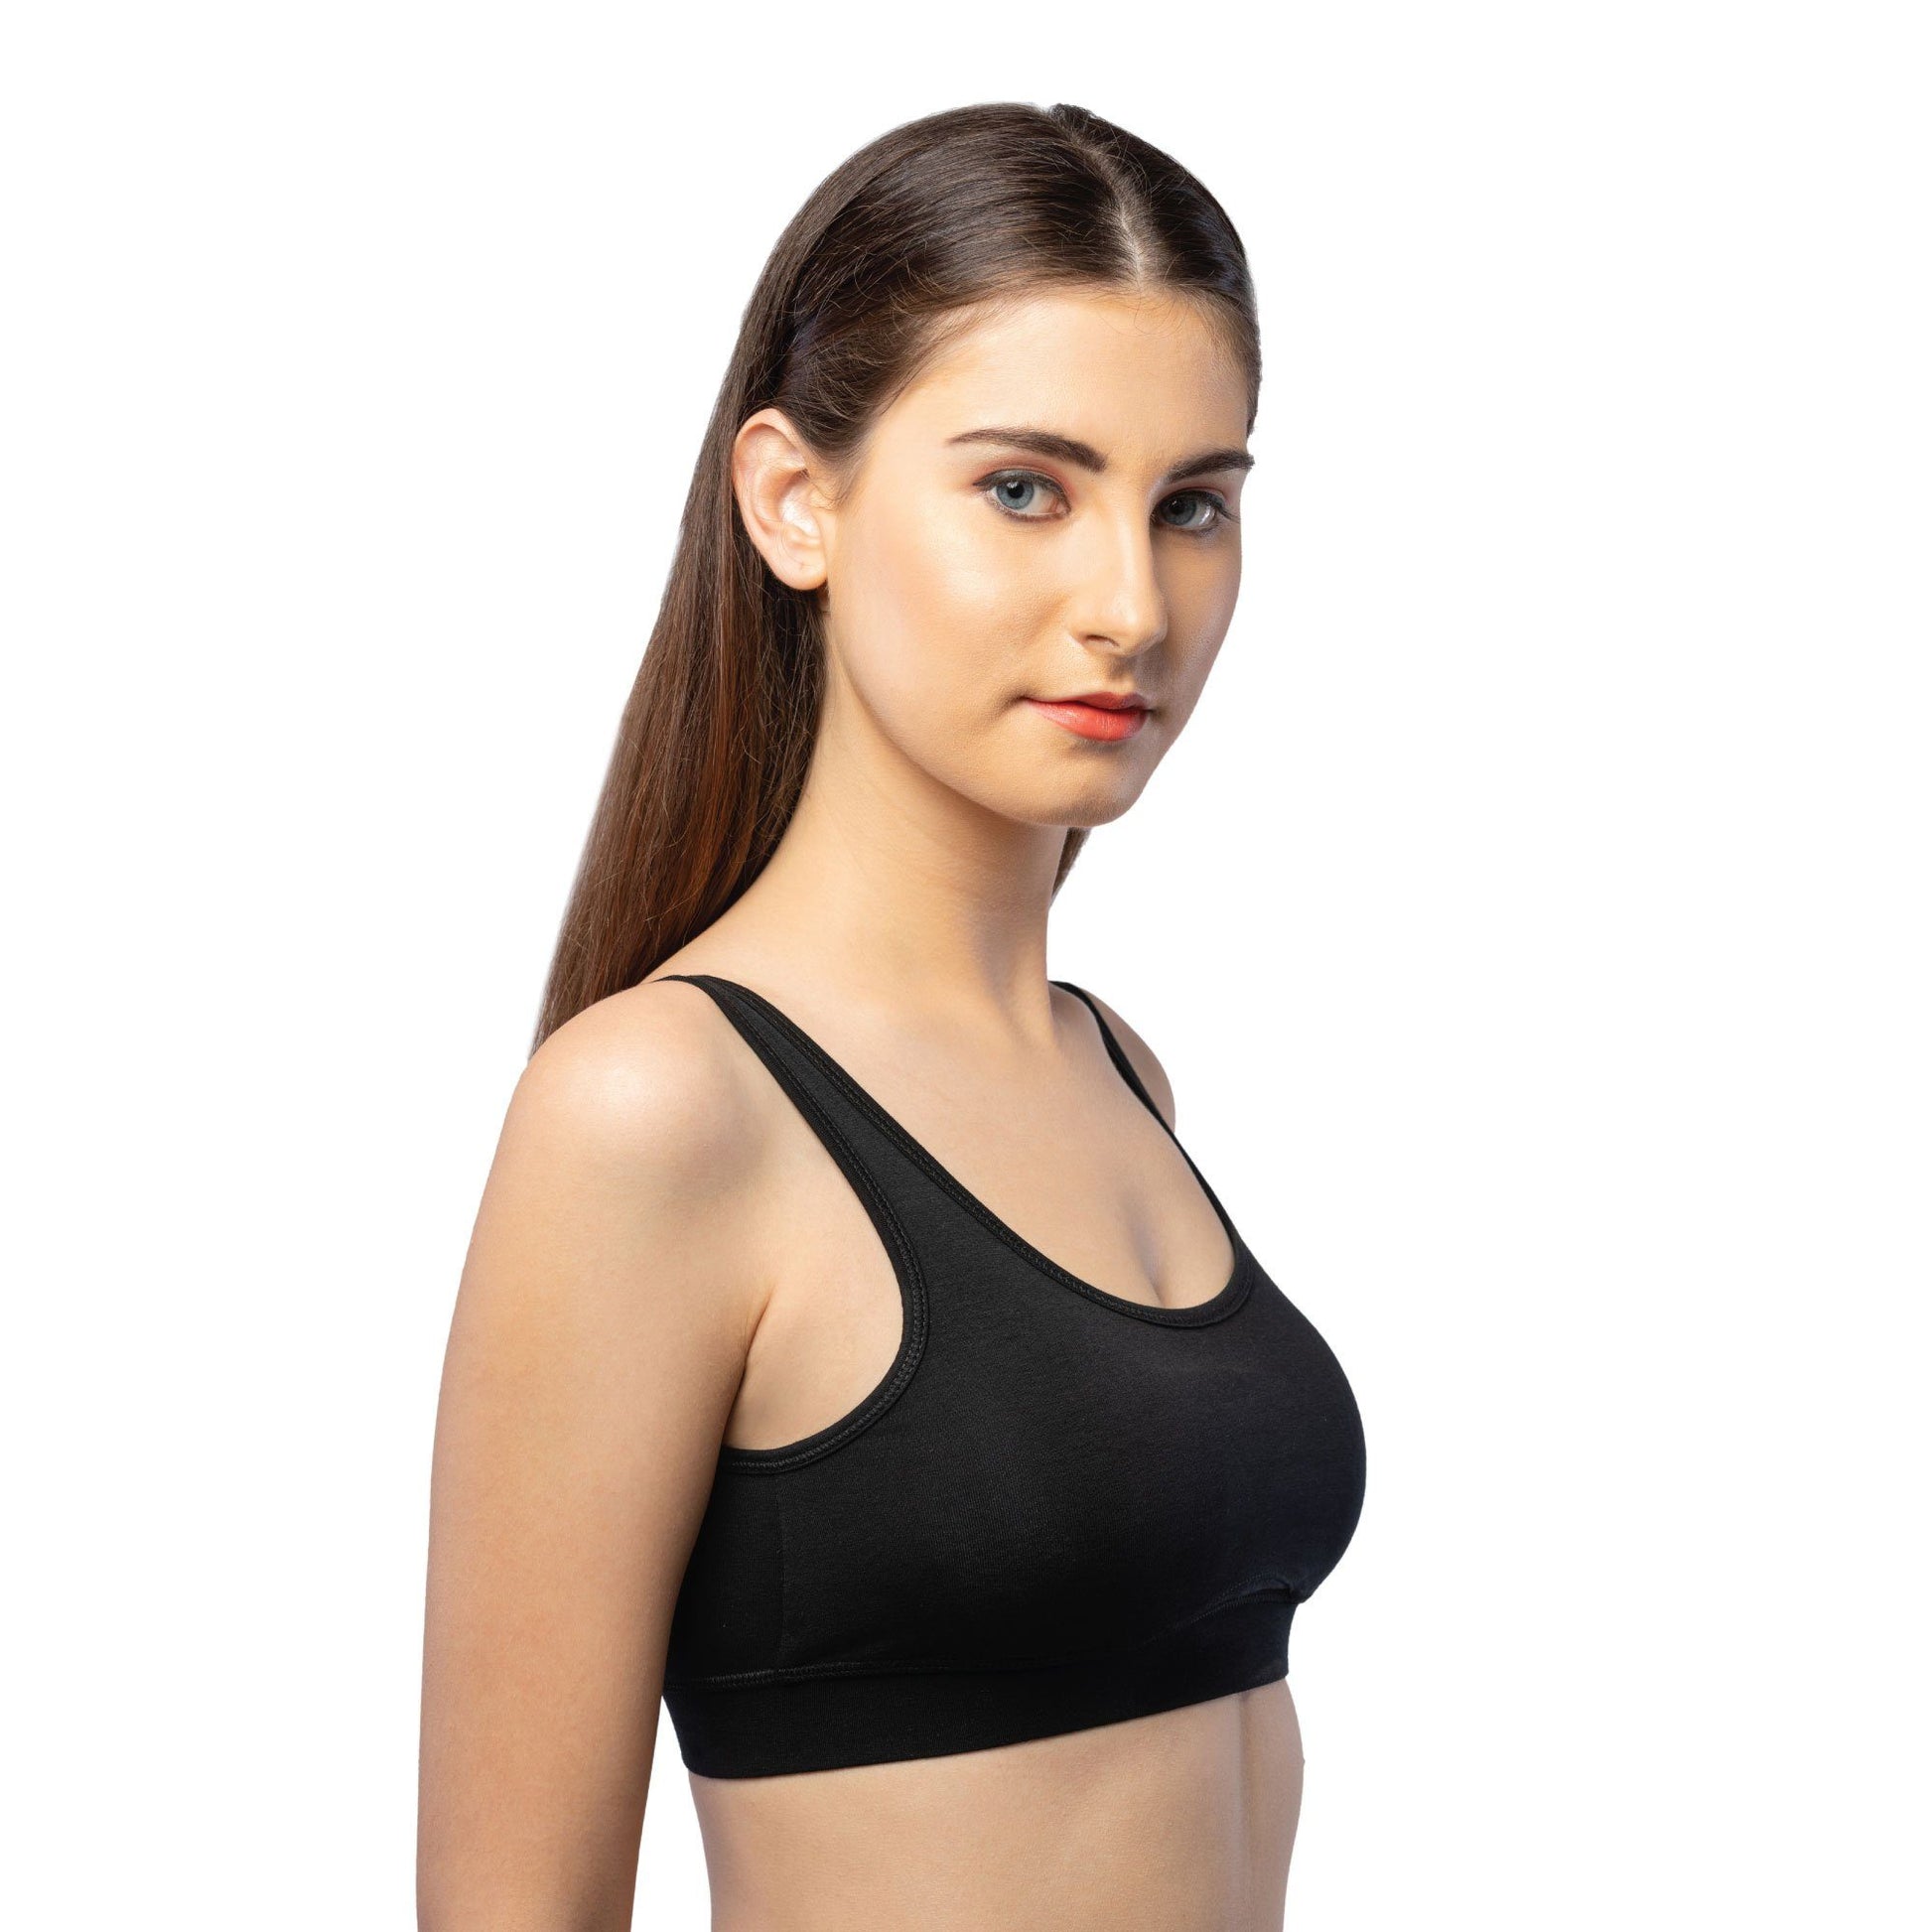 Autumnz Tilia Bamboo Sleep Bra (With removable cup padding)